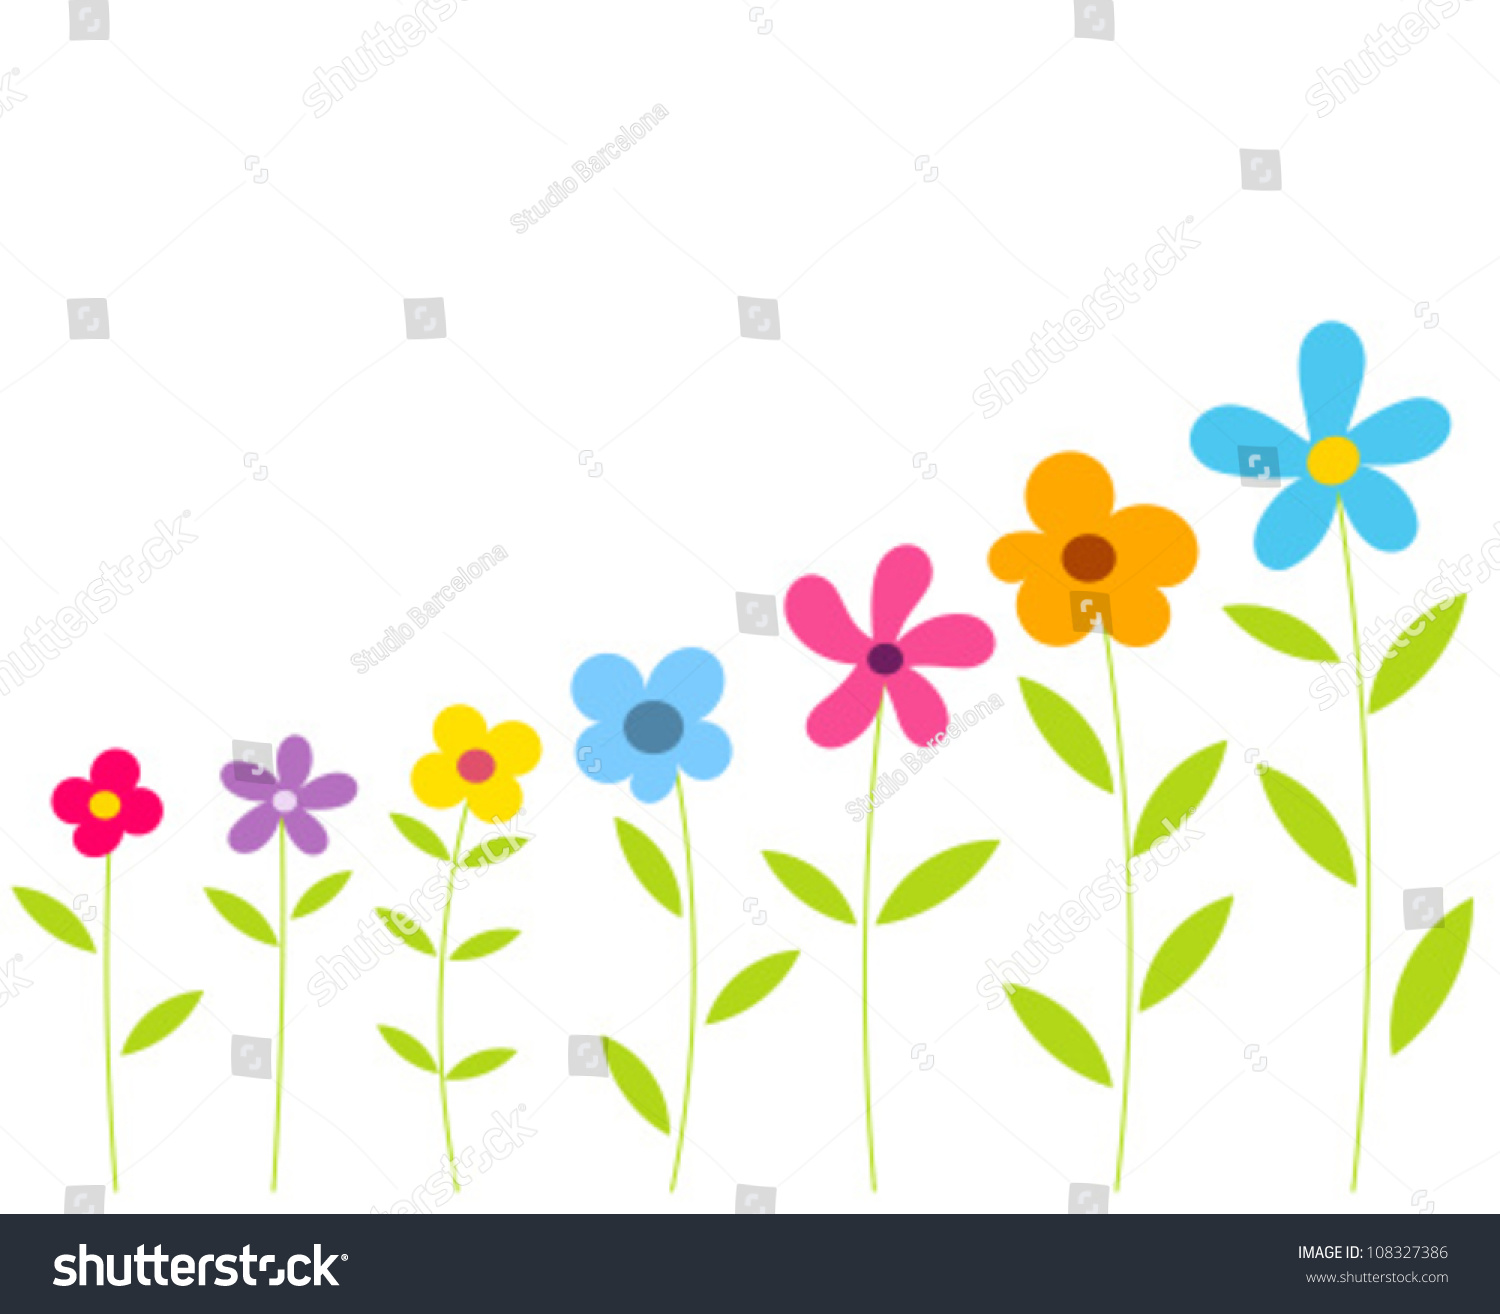 flower growing clipart - photo #23